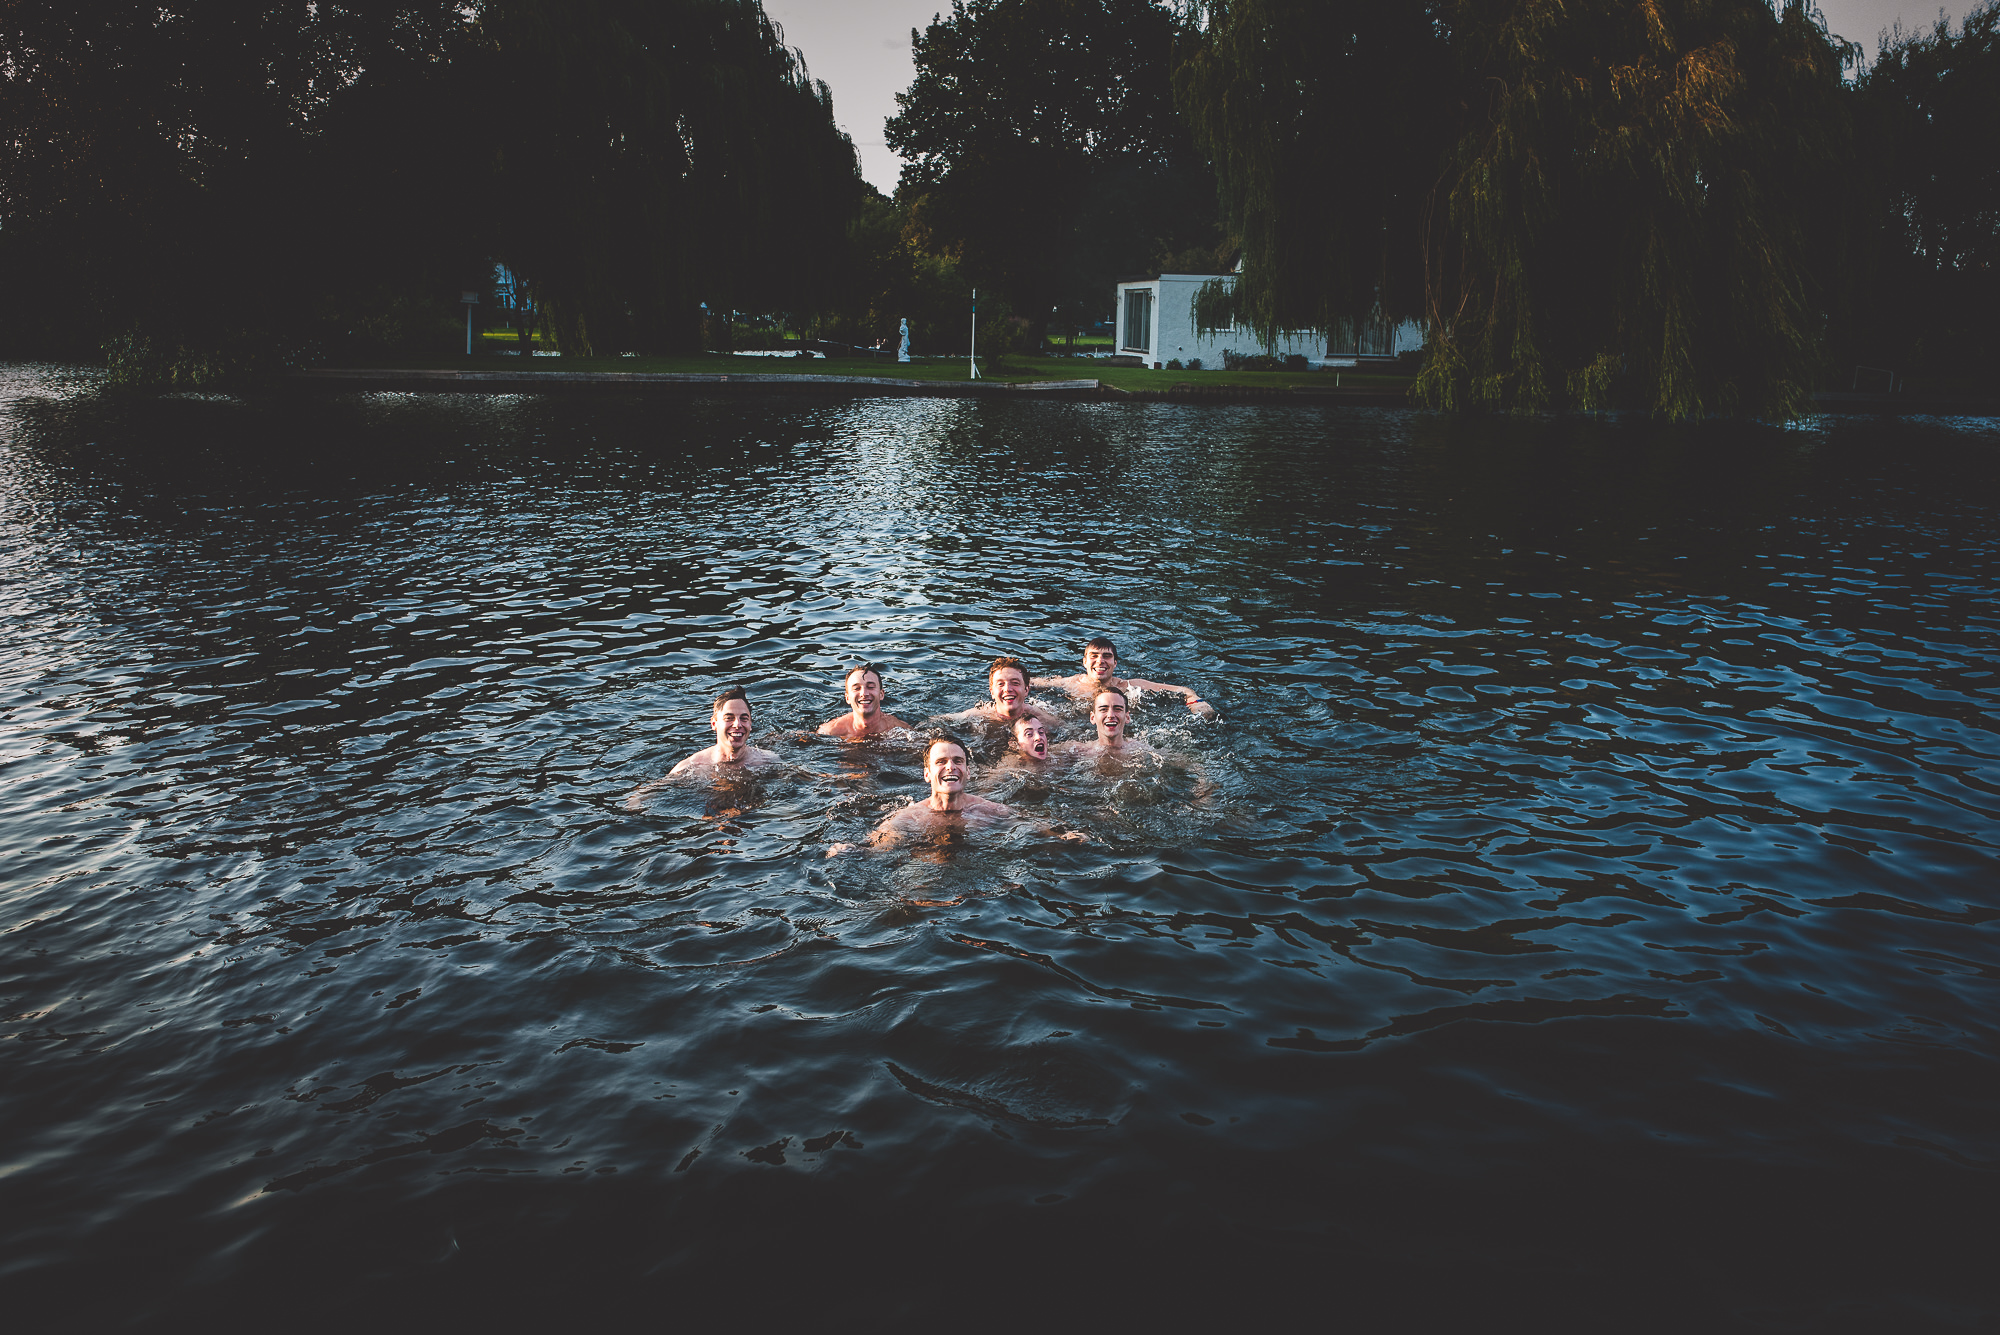 A wedding party swimming in the water for a memorable photo.